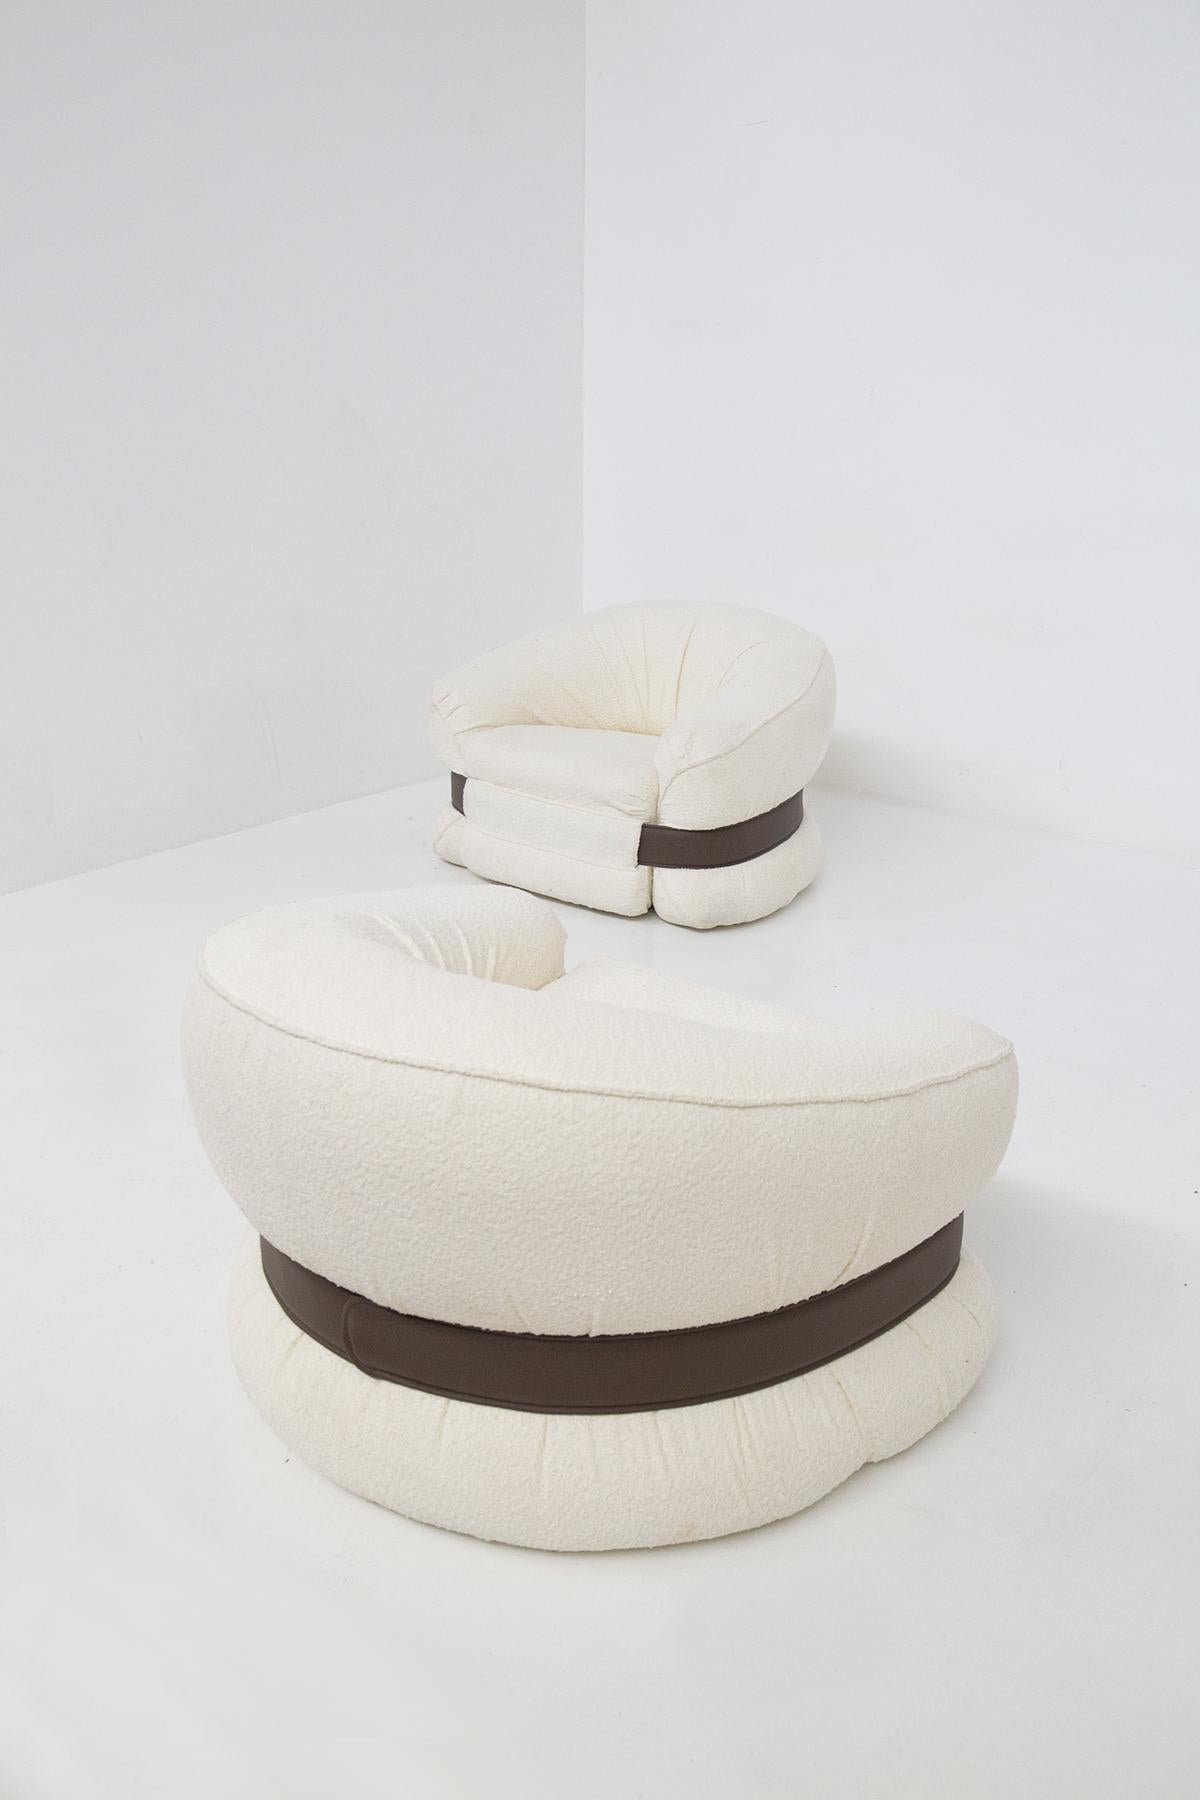 Mid-Century Modern Rare Pair of Adriano Piazzesi Armchairs in White Bouclé